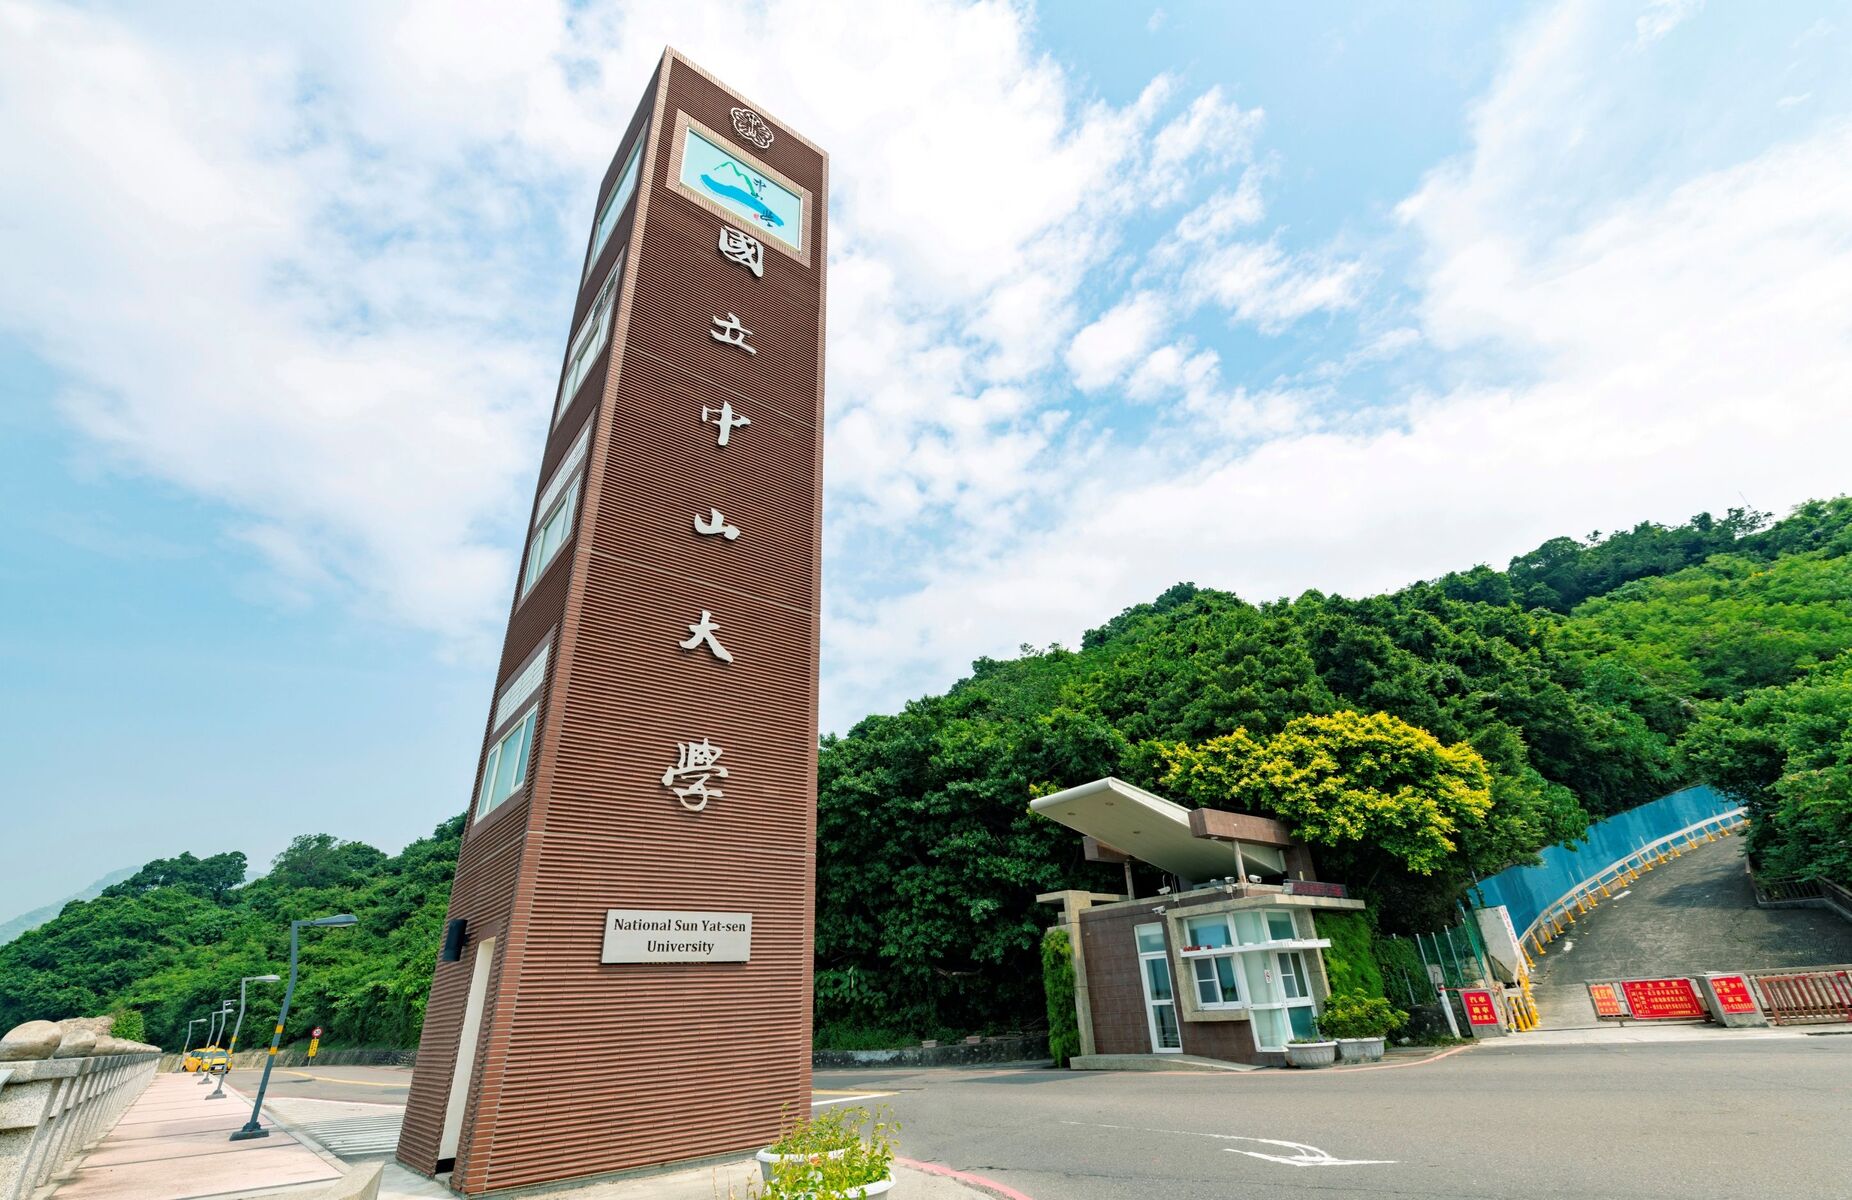 NSYSU ranks top four in Taiwan according to the latest QS World University Rankings by Subject